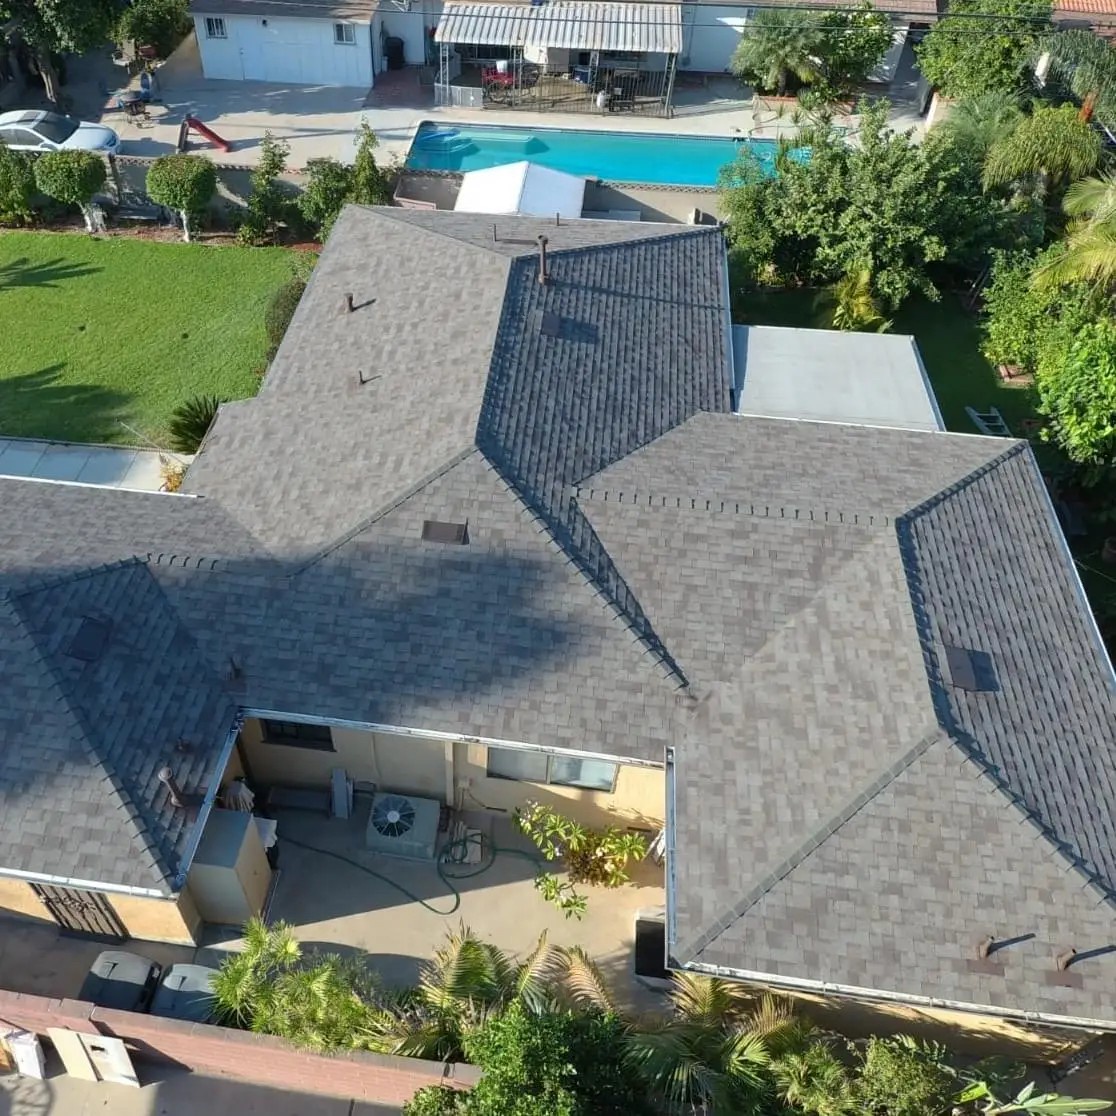 Get Your Roof Done Right: Why Roofing Contractors in Long Beach, CA Are Your Best Bet